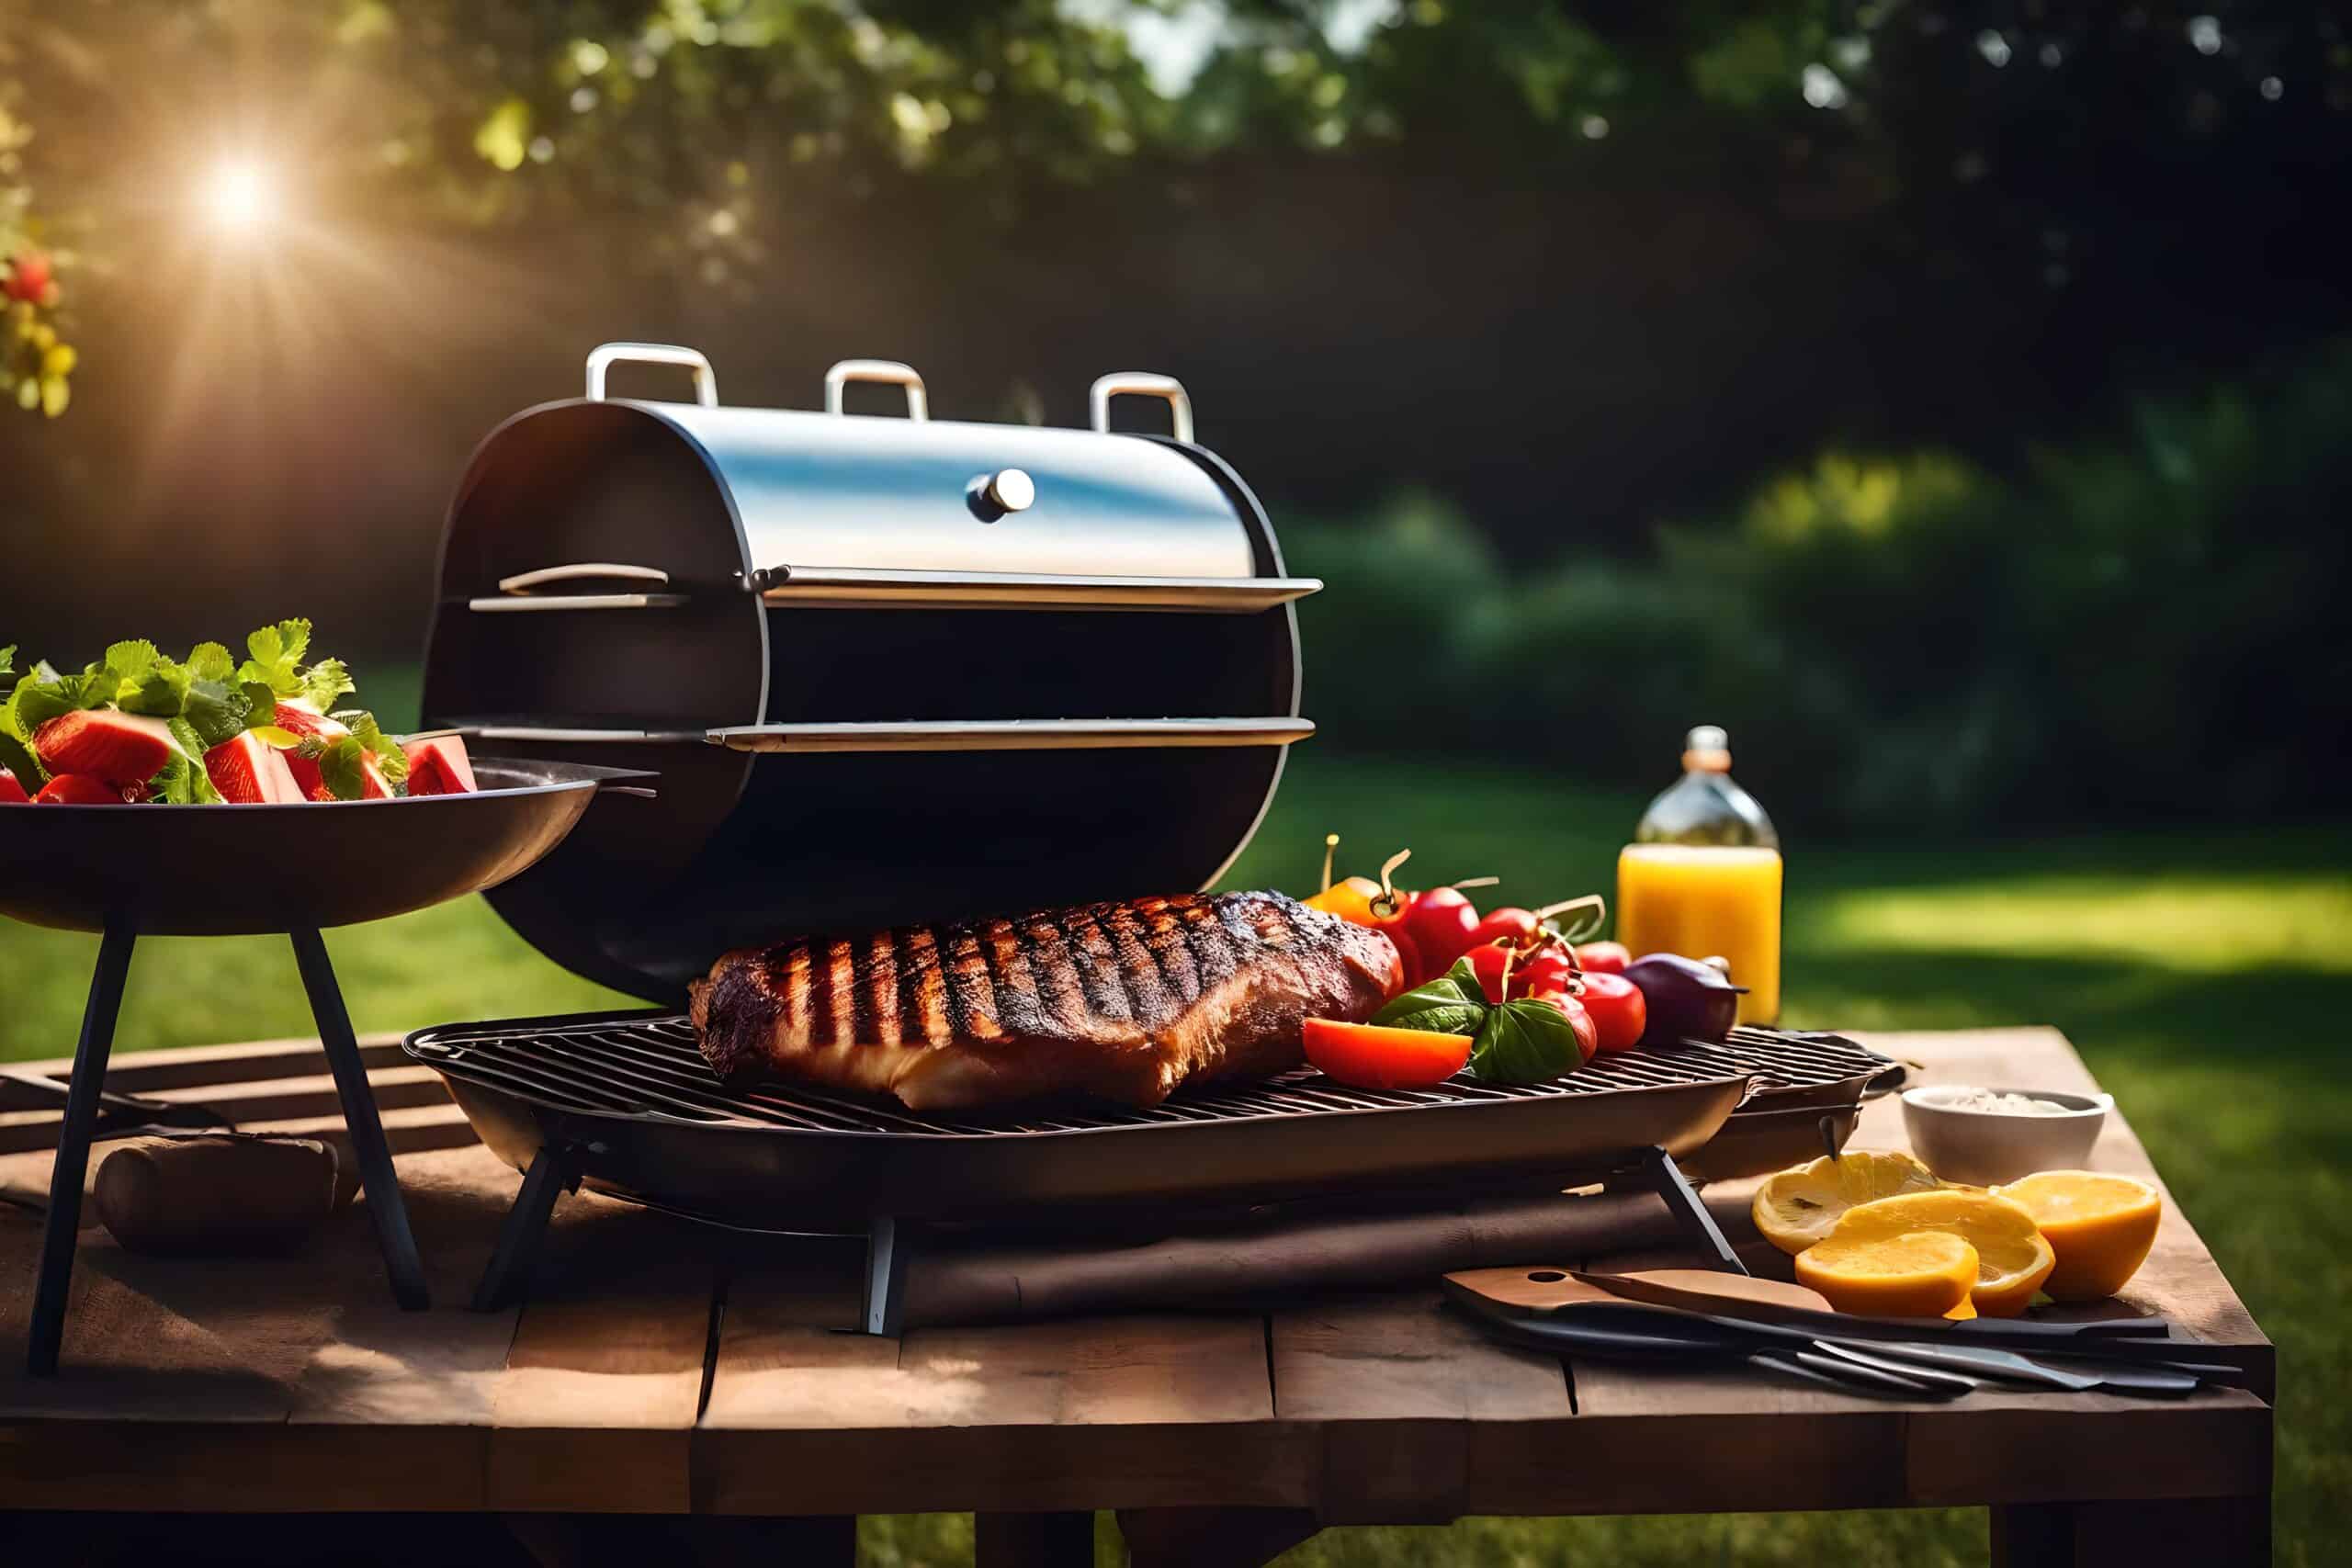 www.appr.com : How To Use A Charcoal Grill As A Smoker?